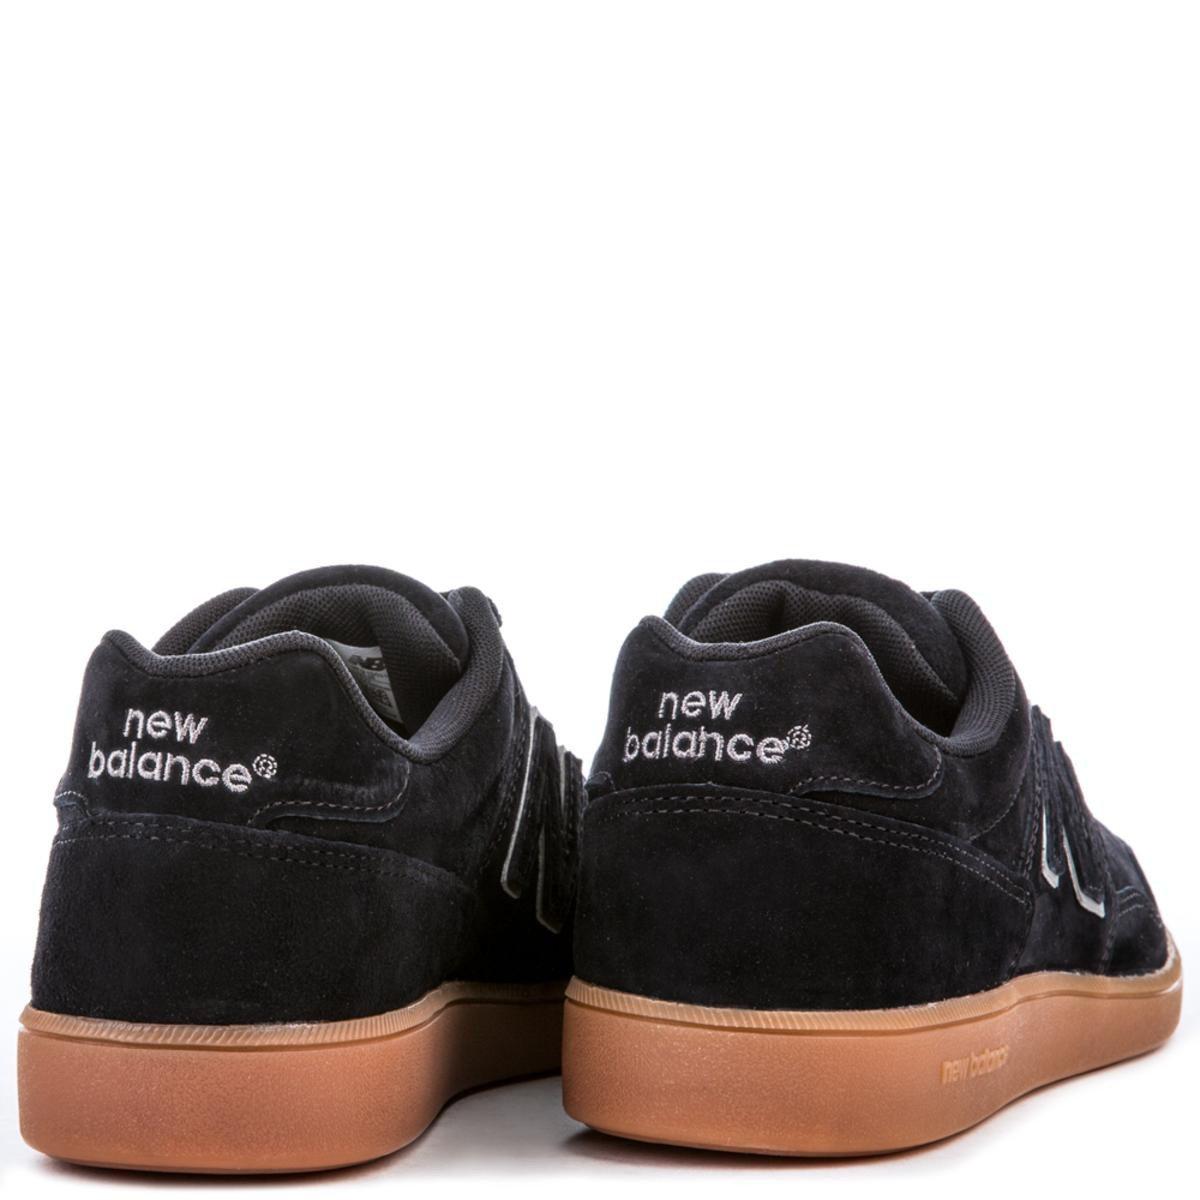 New Balance 288 Suede Black With Gum Sneakers for Men - Lyst